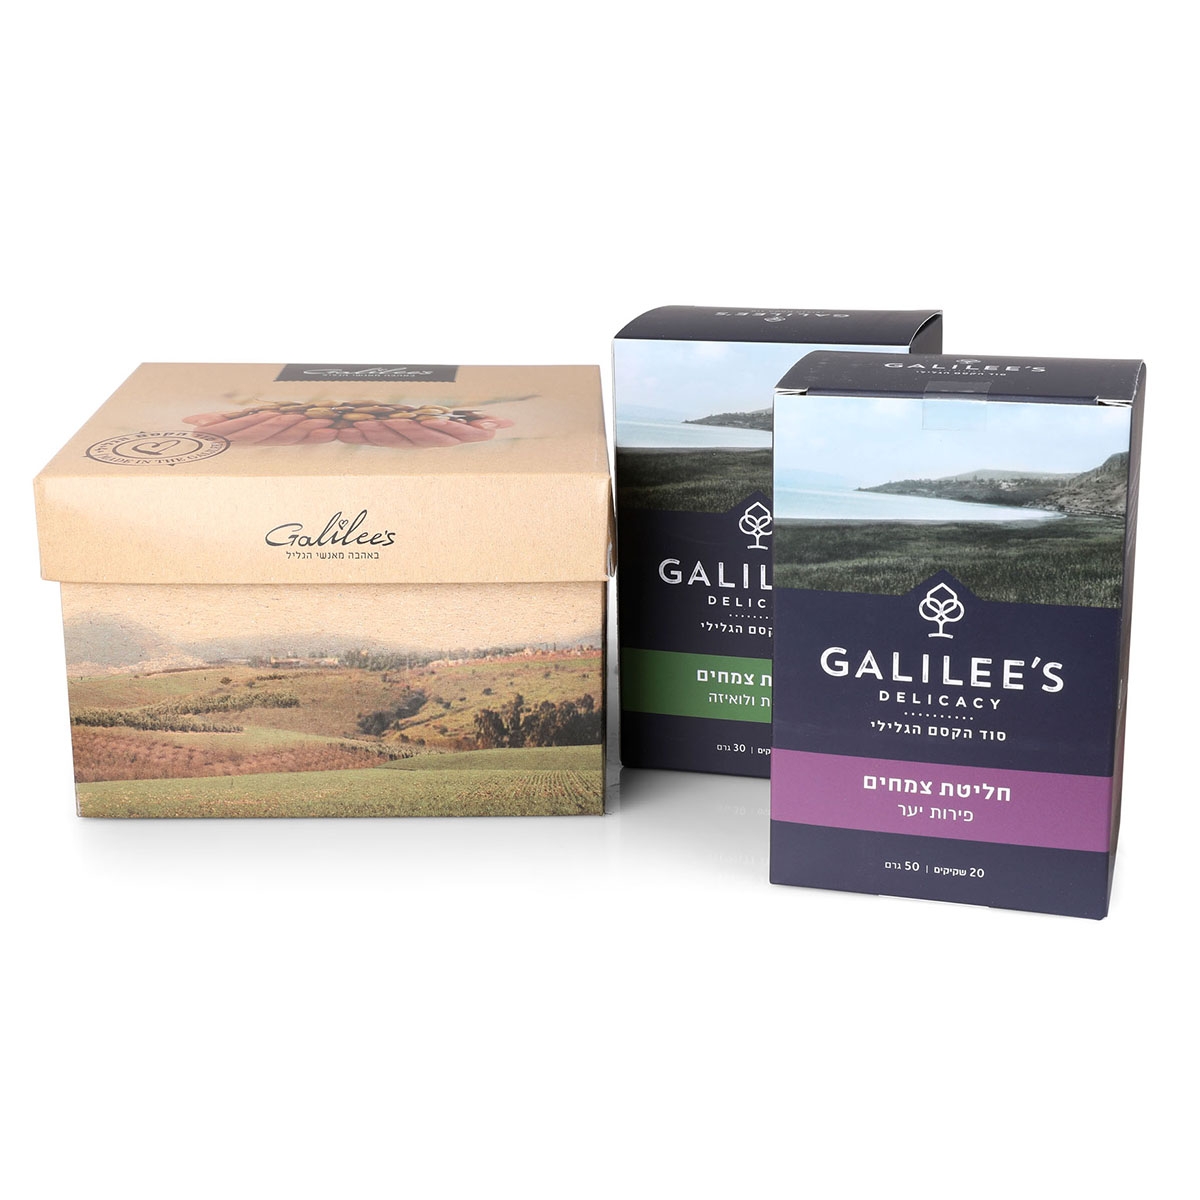 Galilee's Exclusive Infusion Tea Gift Box - Set of 2 - 1